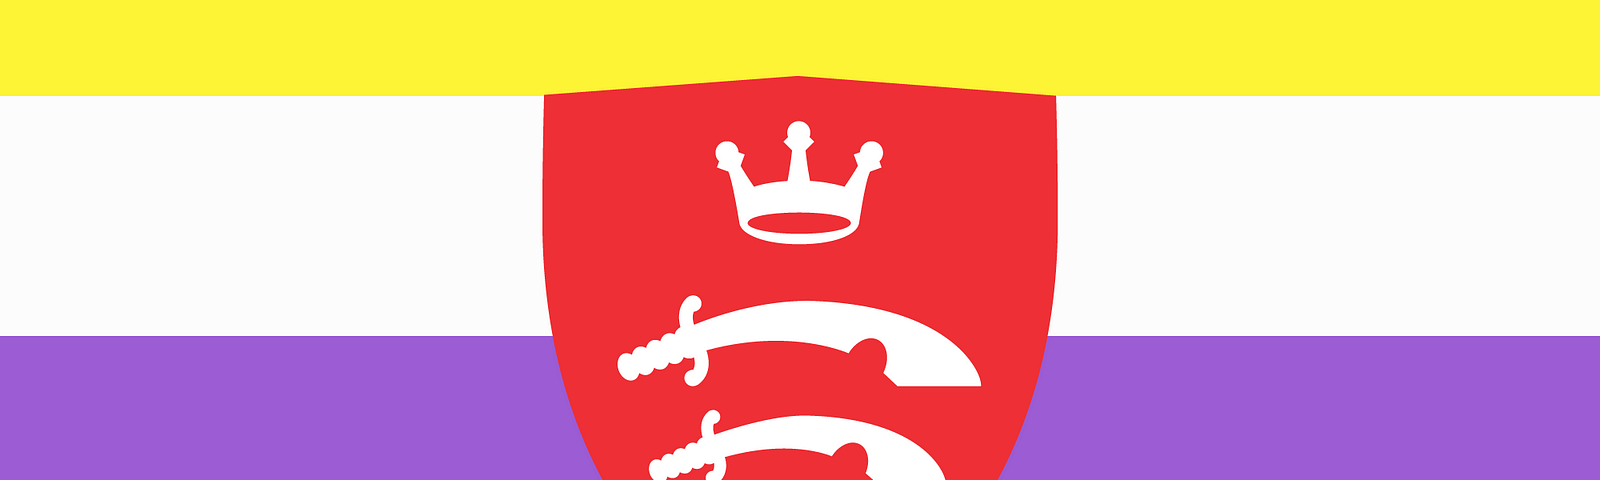 Non-binary flag with the Middlesex University shield